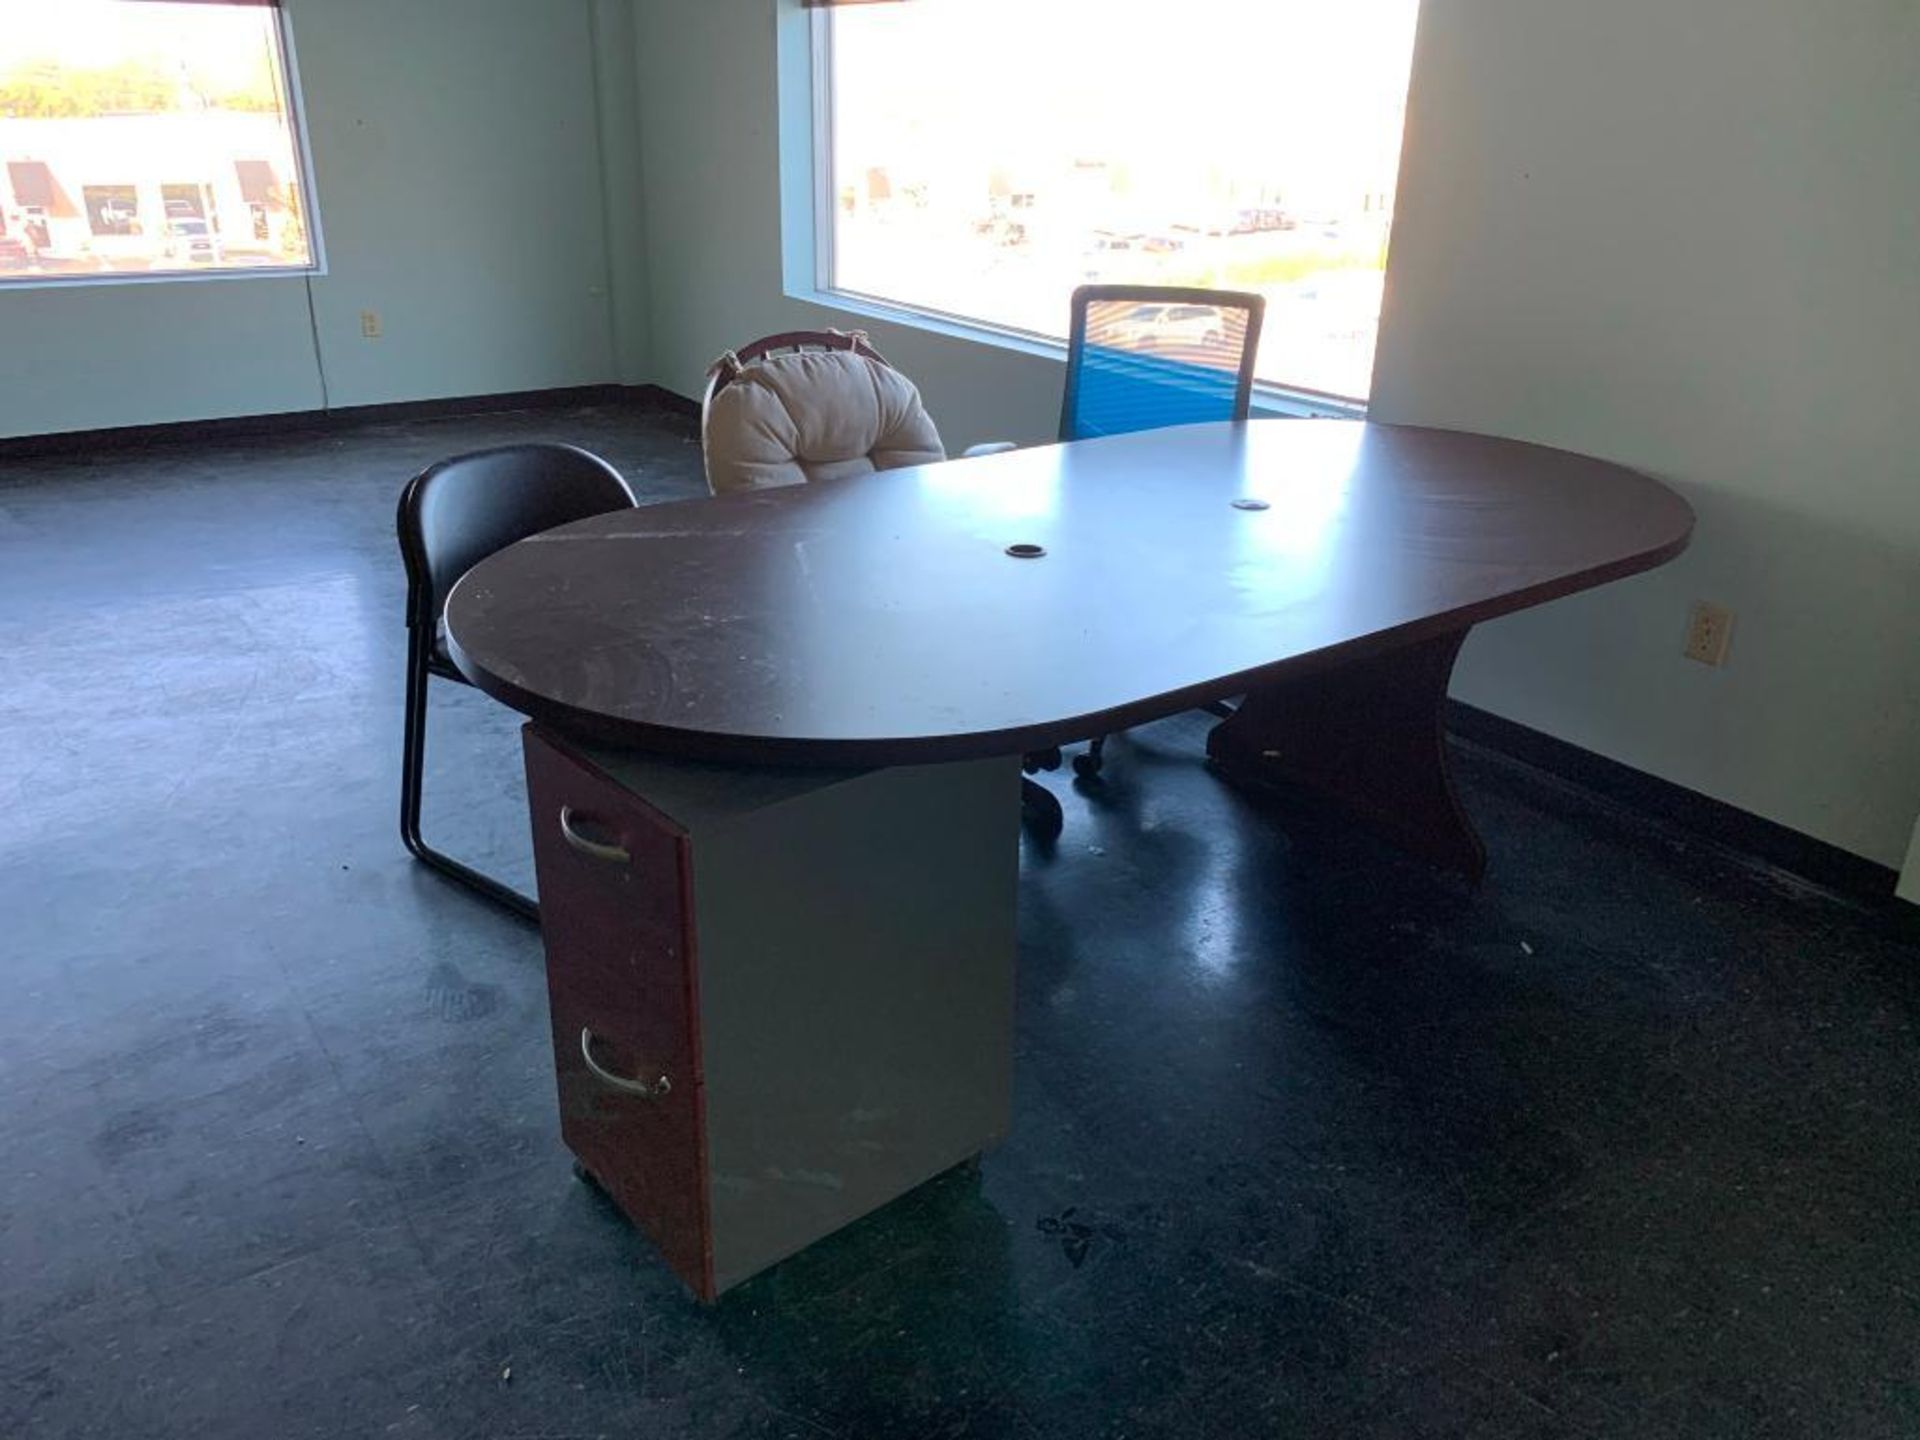 U-SHAPED DESK UNIT, SMALL CONFERENCE TABLE - Image 3 of 3